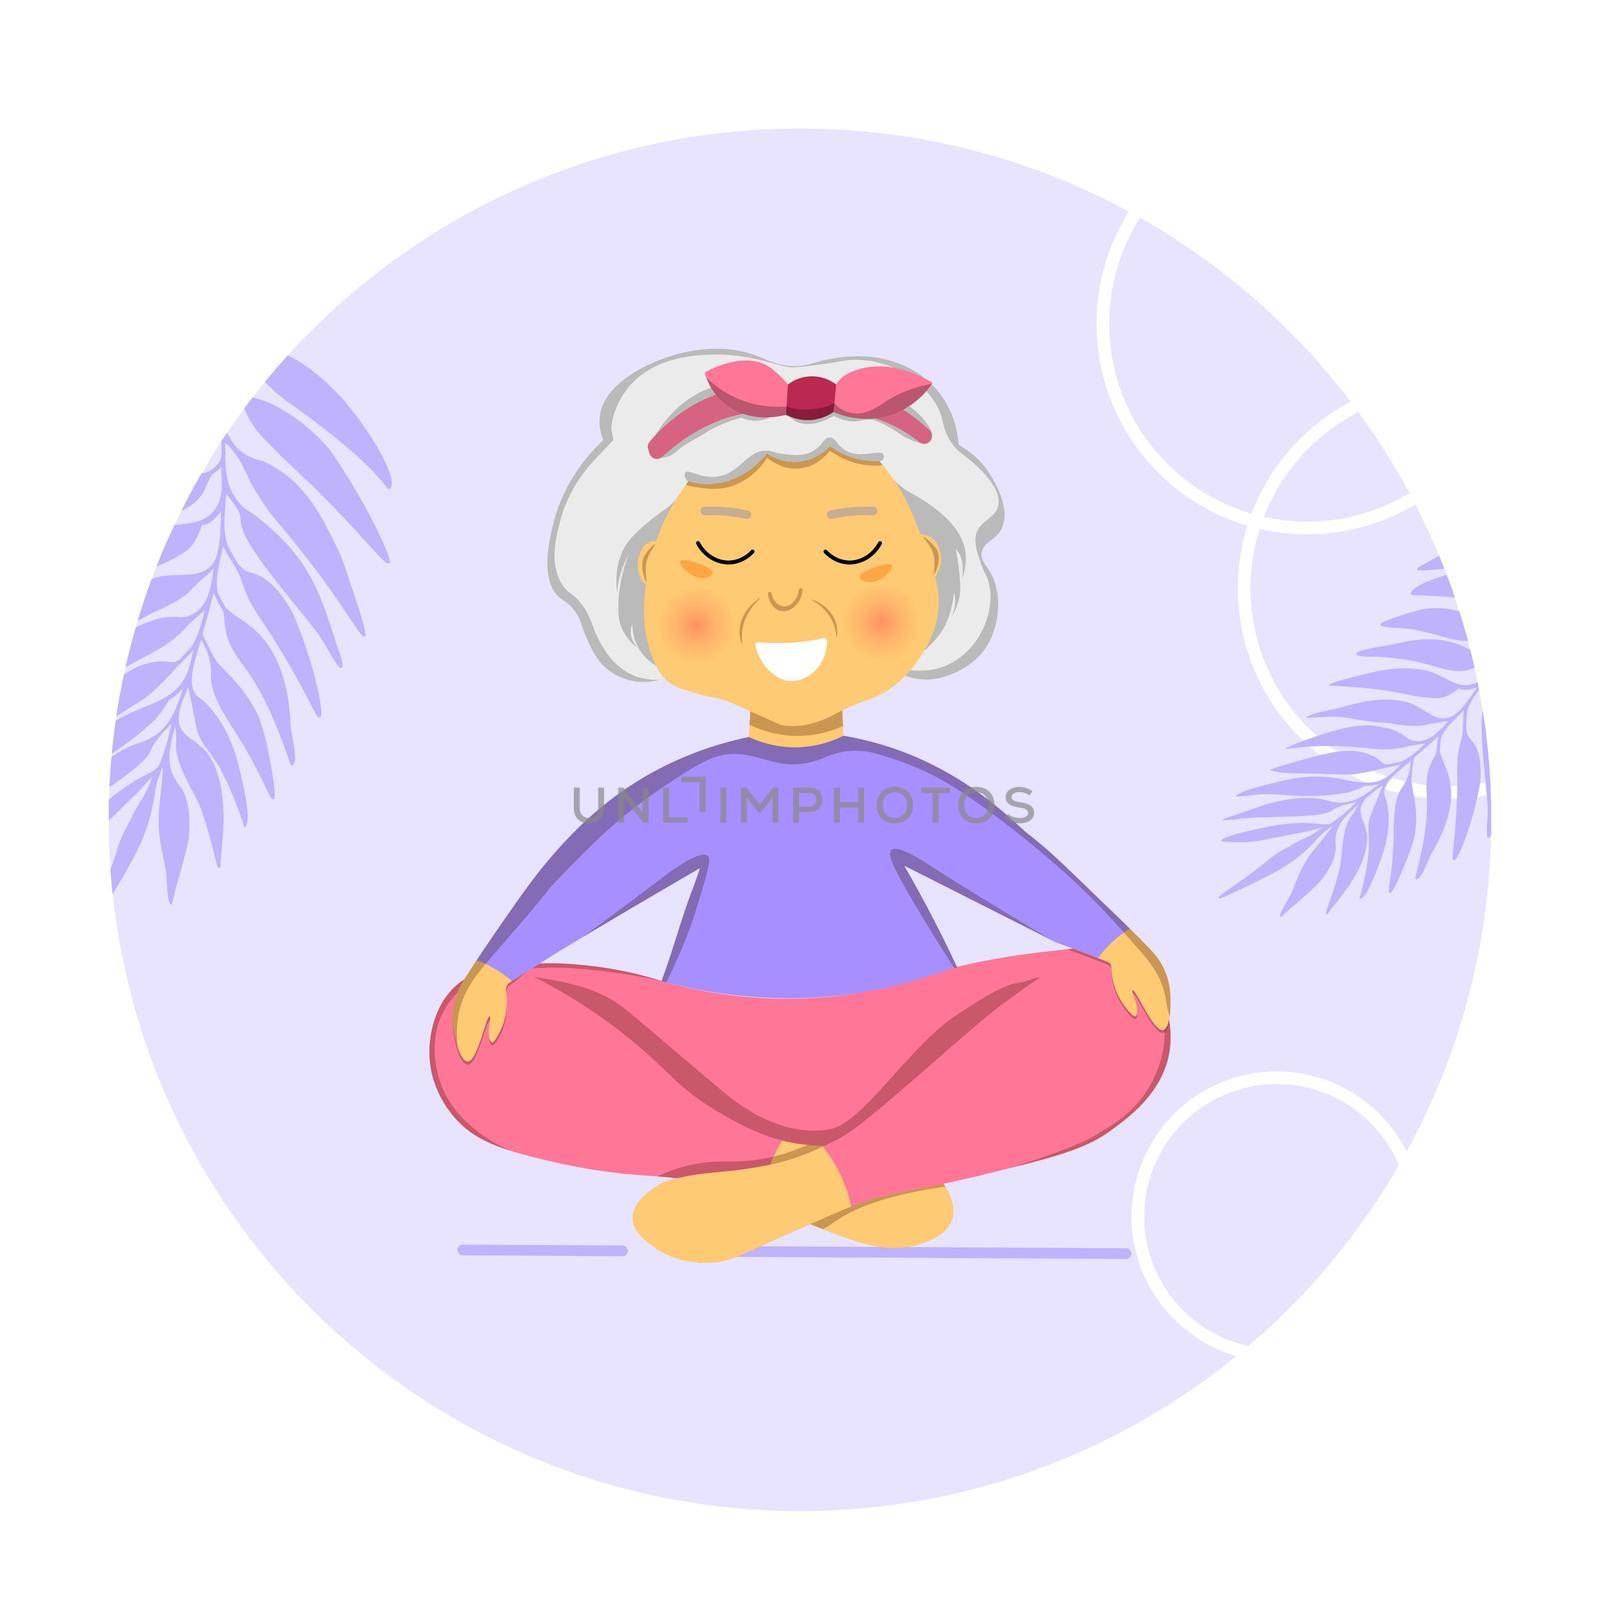 Sporty Granny does Yoga. Old person. Vector colorful cartoon illustration. Senior woman in pose yoga. Exercising for better health. Isolated flat image. Grandma. Grandmother character.